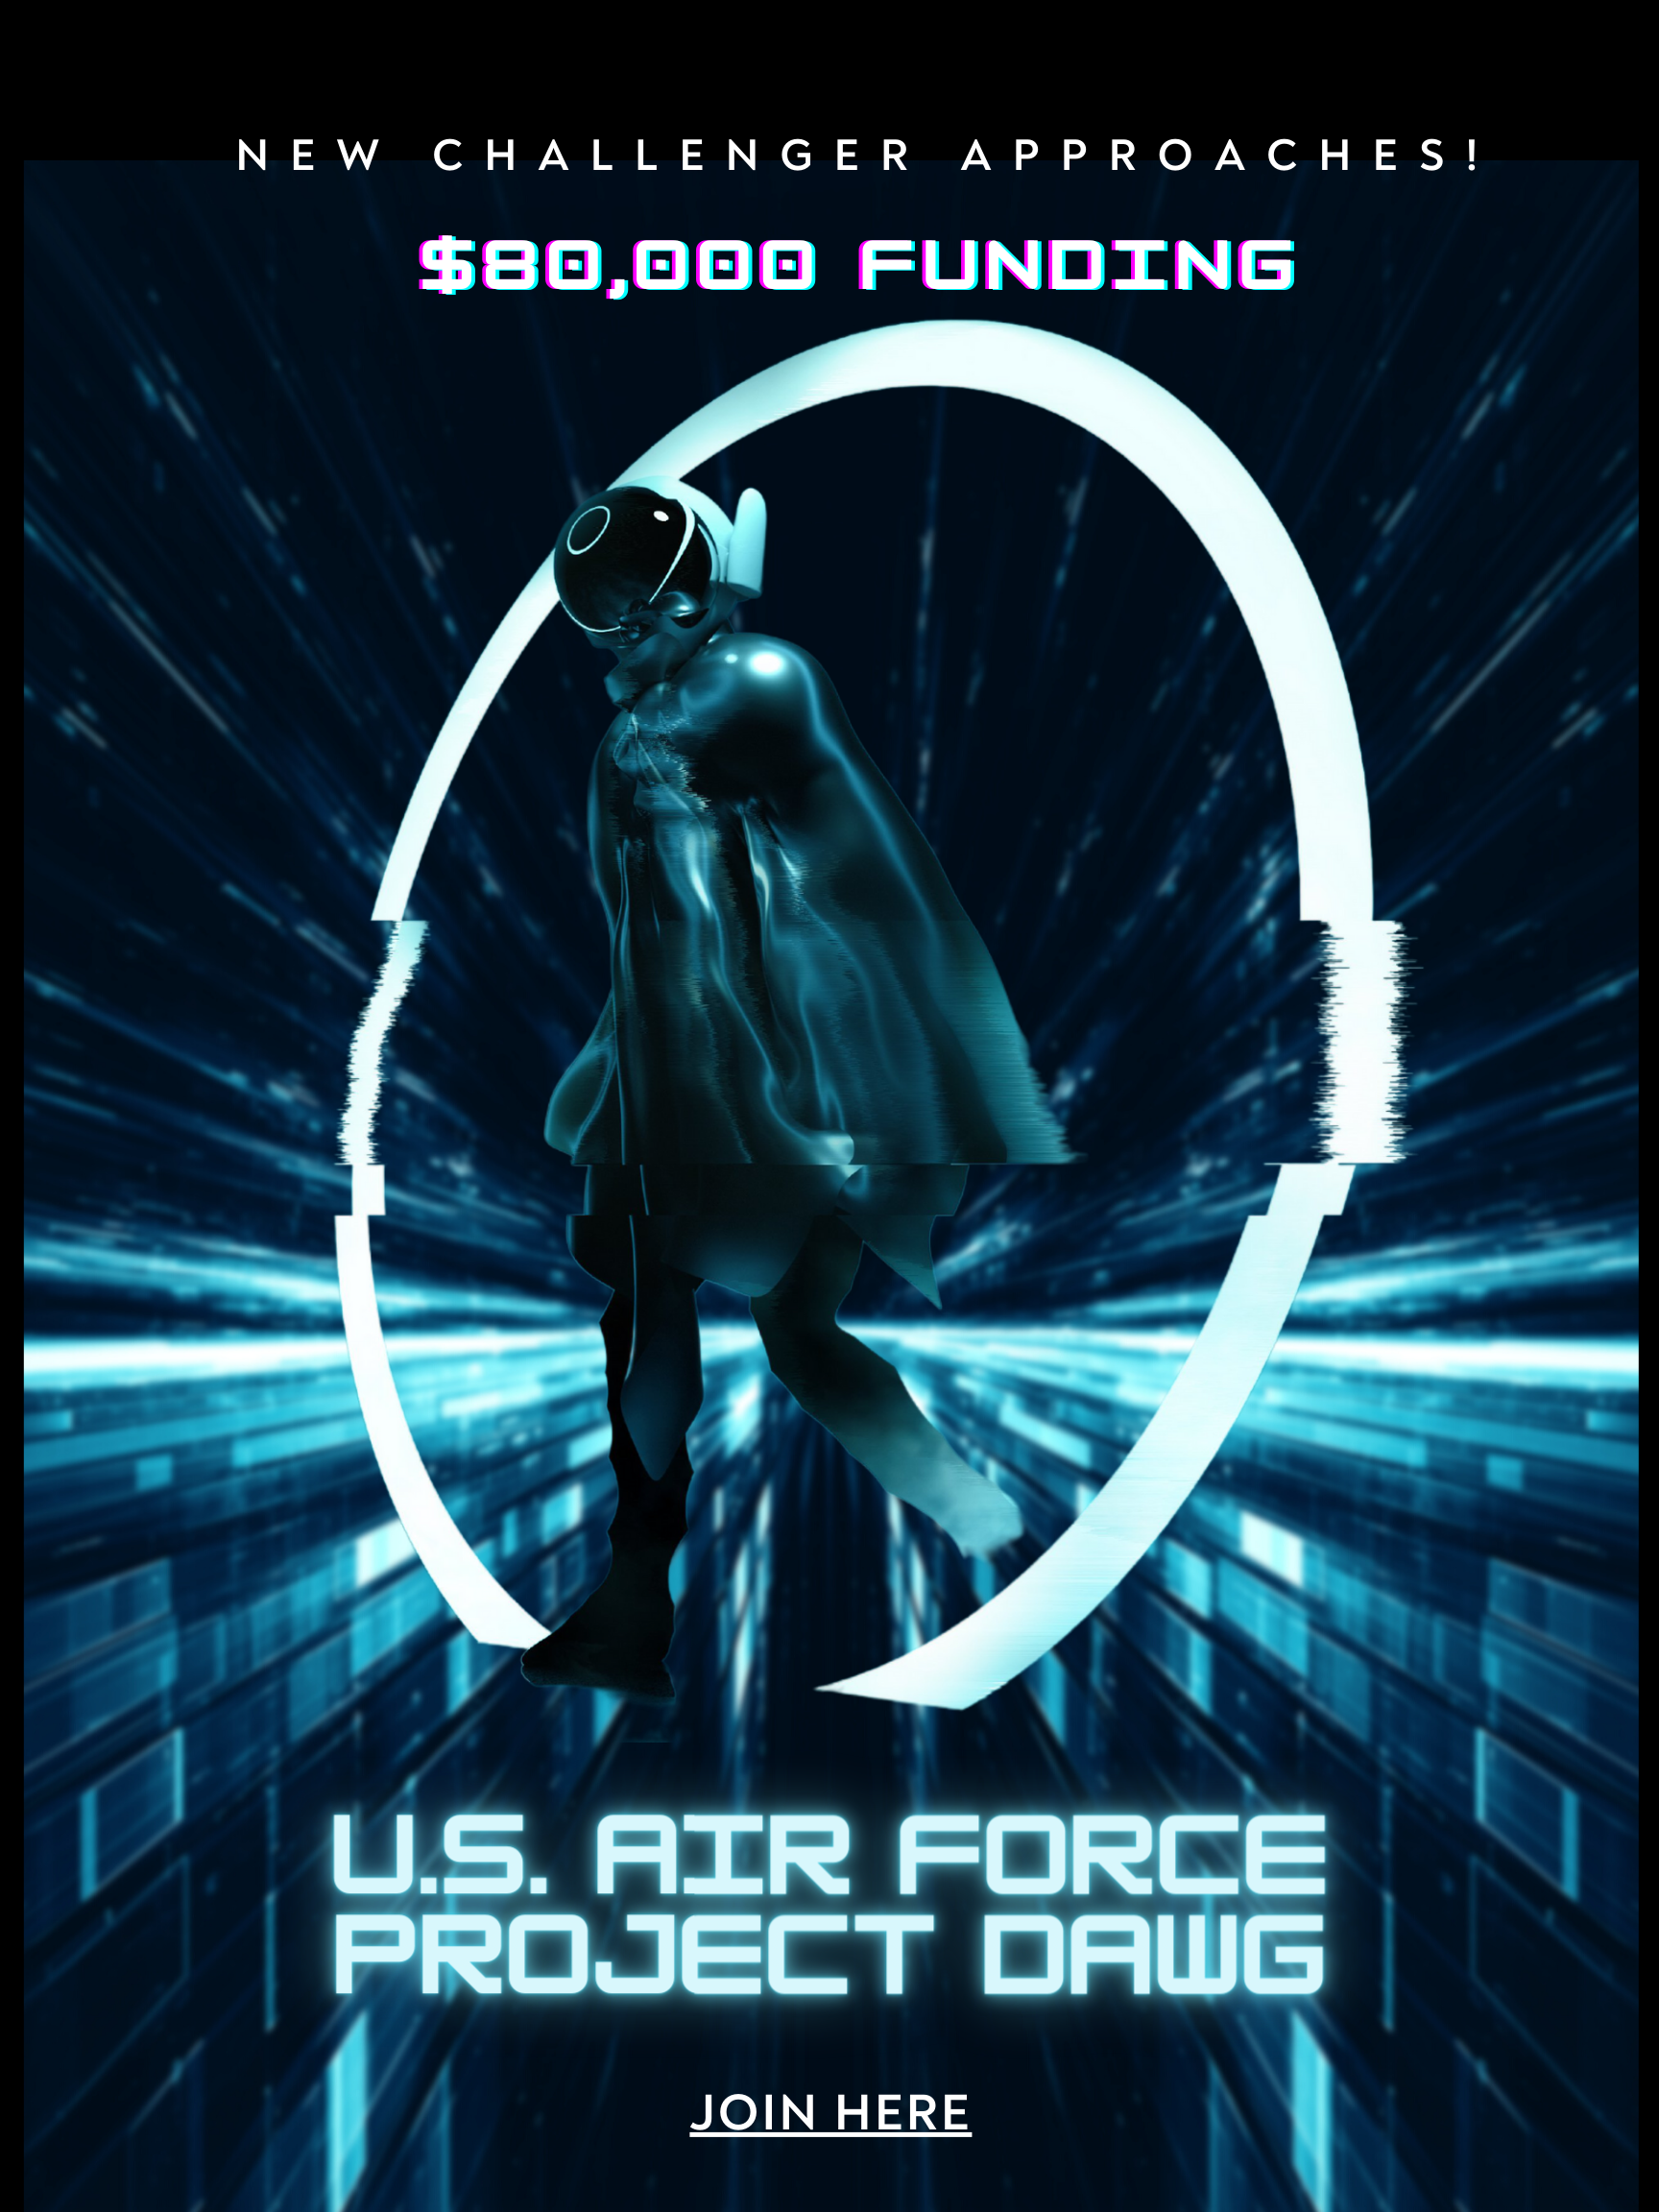 $80,000 Competition for College Students and Game Developers. US Air Force & Innovatrium